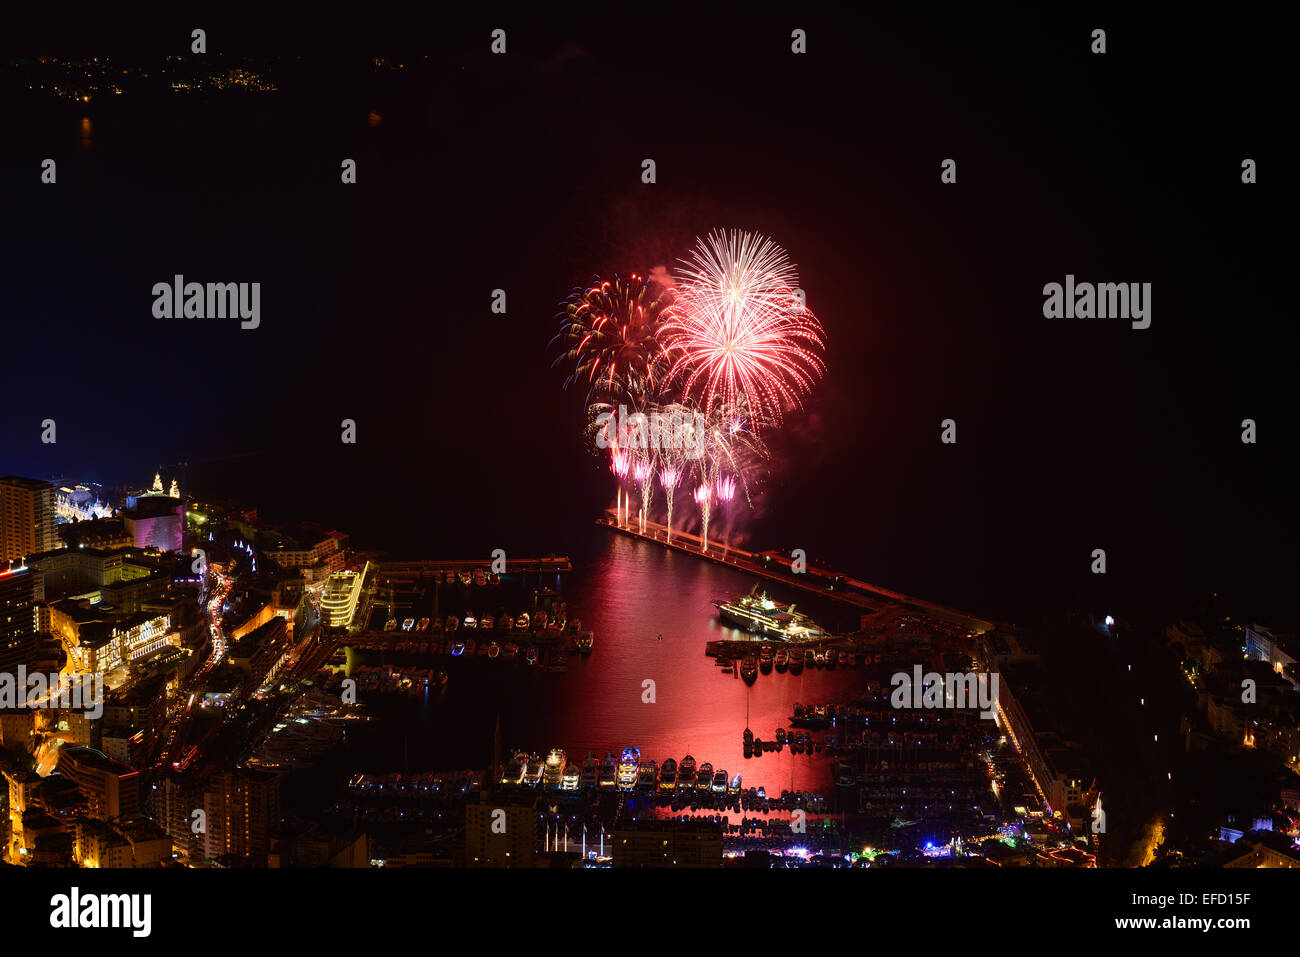 Fireworks over Port Hercule to celebrate the new year (01/01/2015). Principality of Monaco. Stock Photo